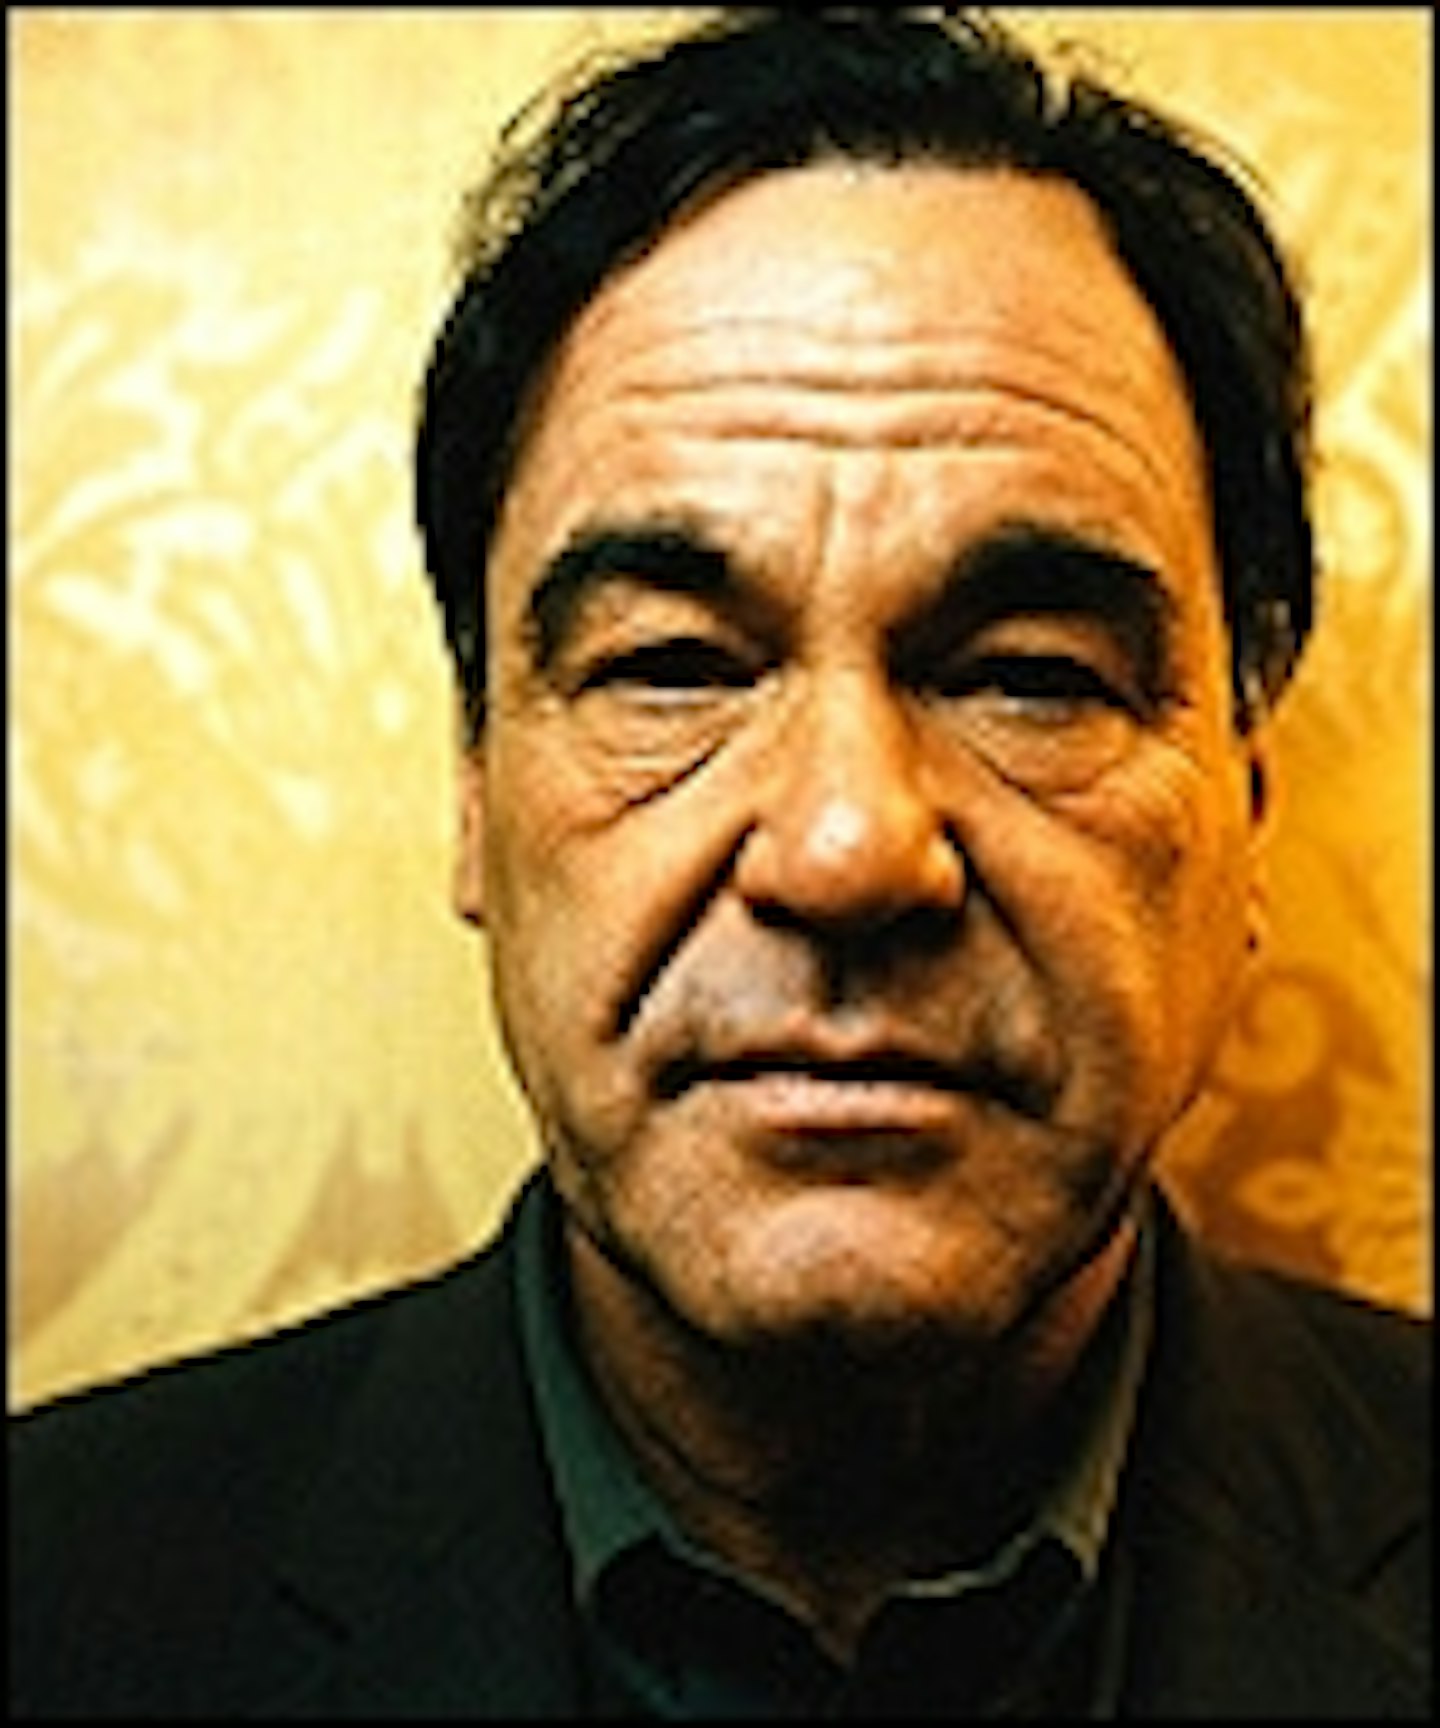 Exclusive: Oliver Stone On Wall Street 2